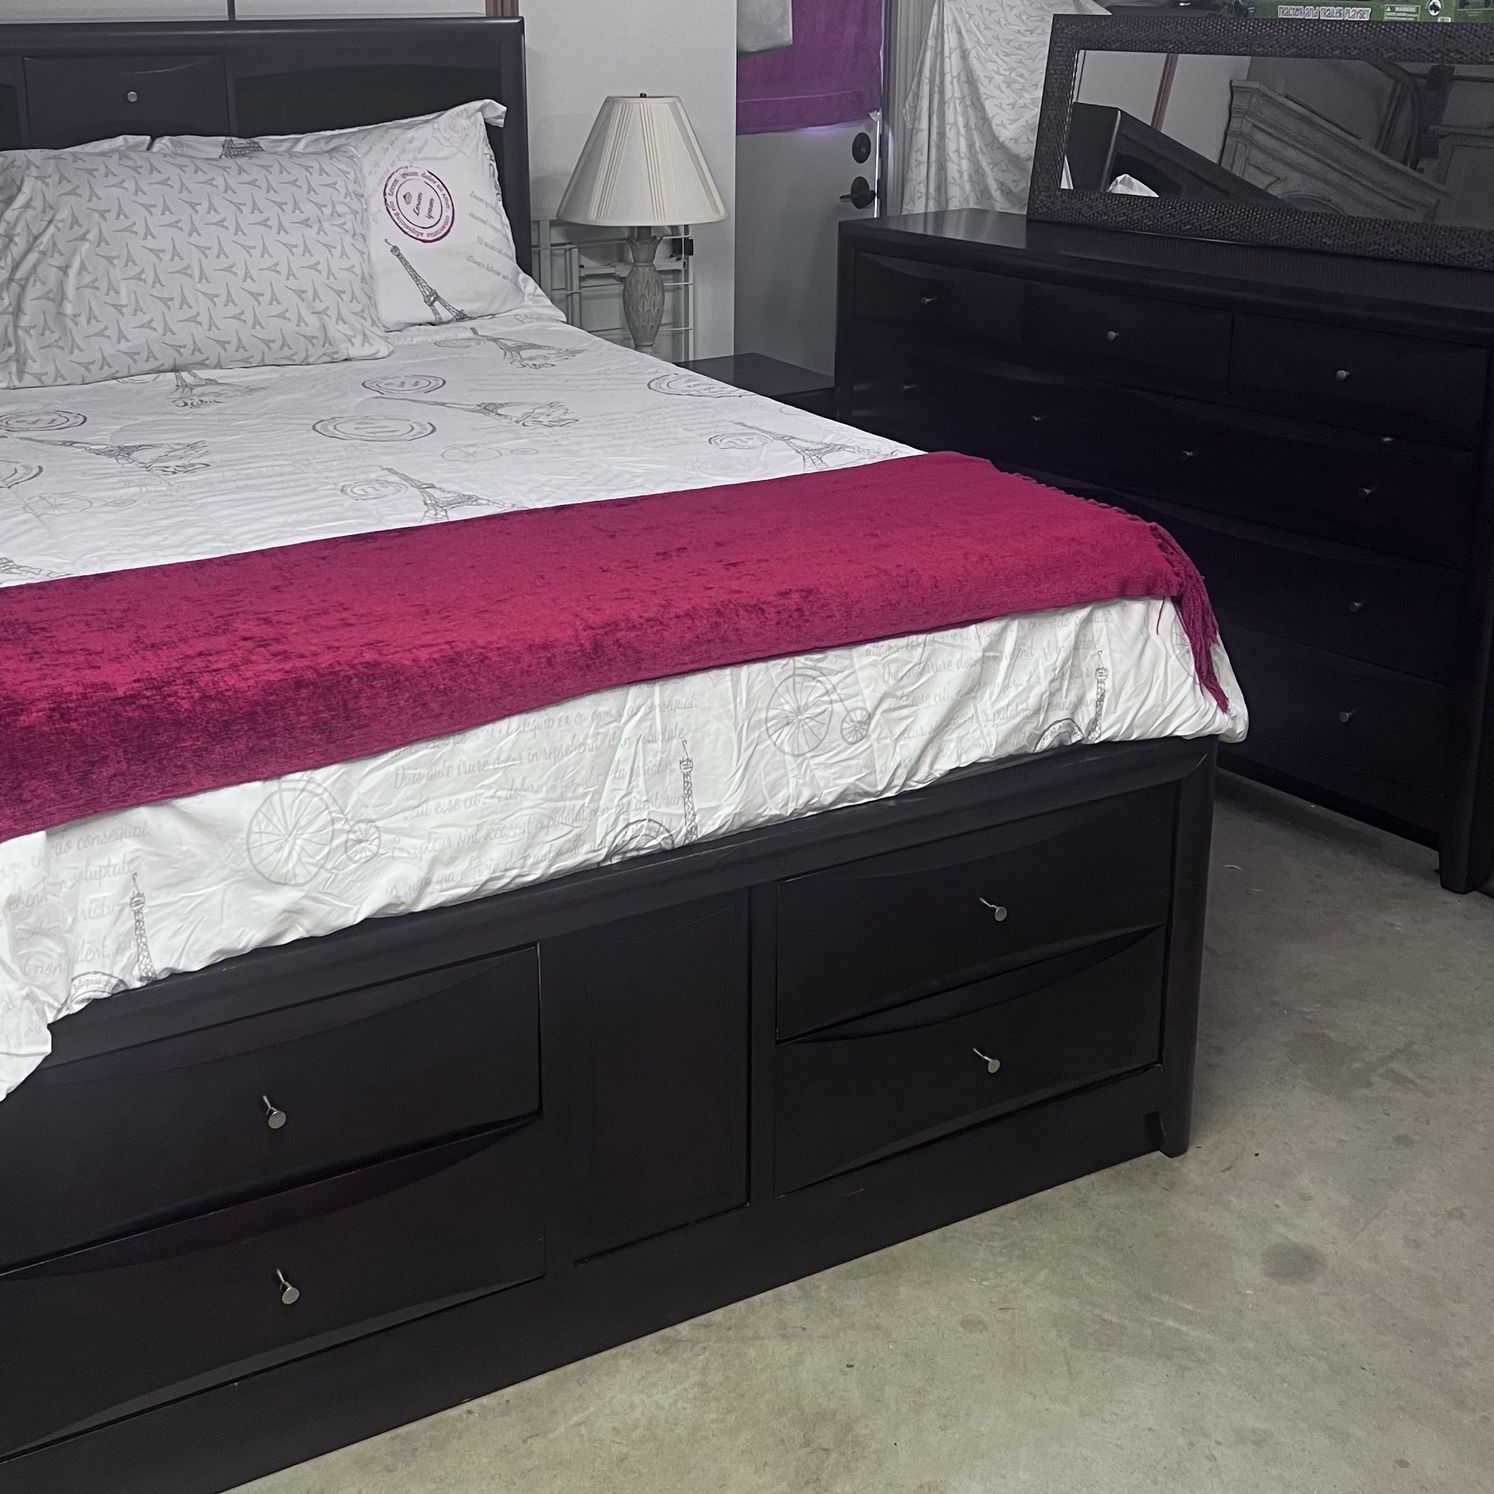 Queen Size Captain Bed with eight drawers of storage at the base of the bed. Includes a nightstand and dresser with nine drawers. Hablo españ español